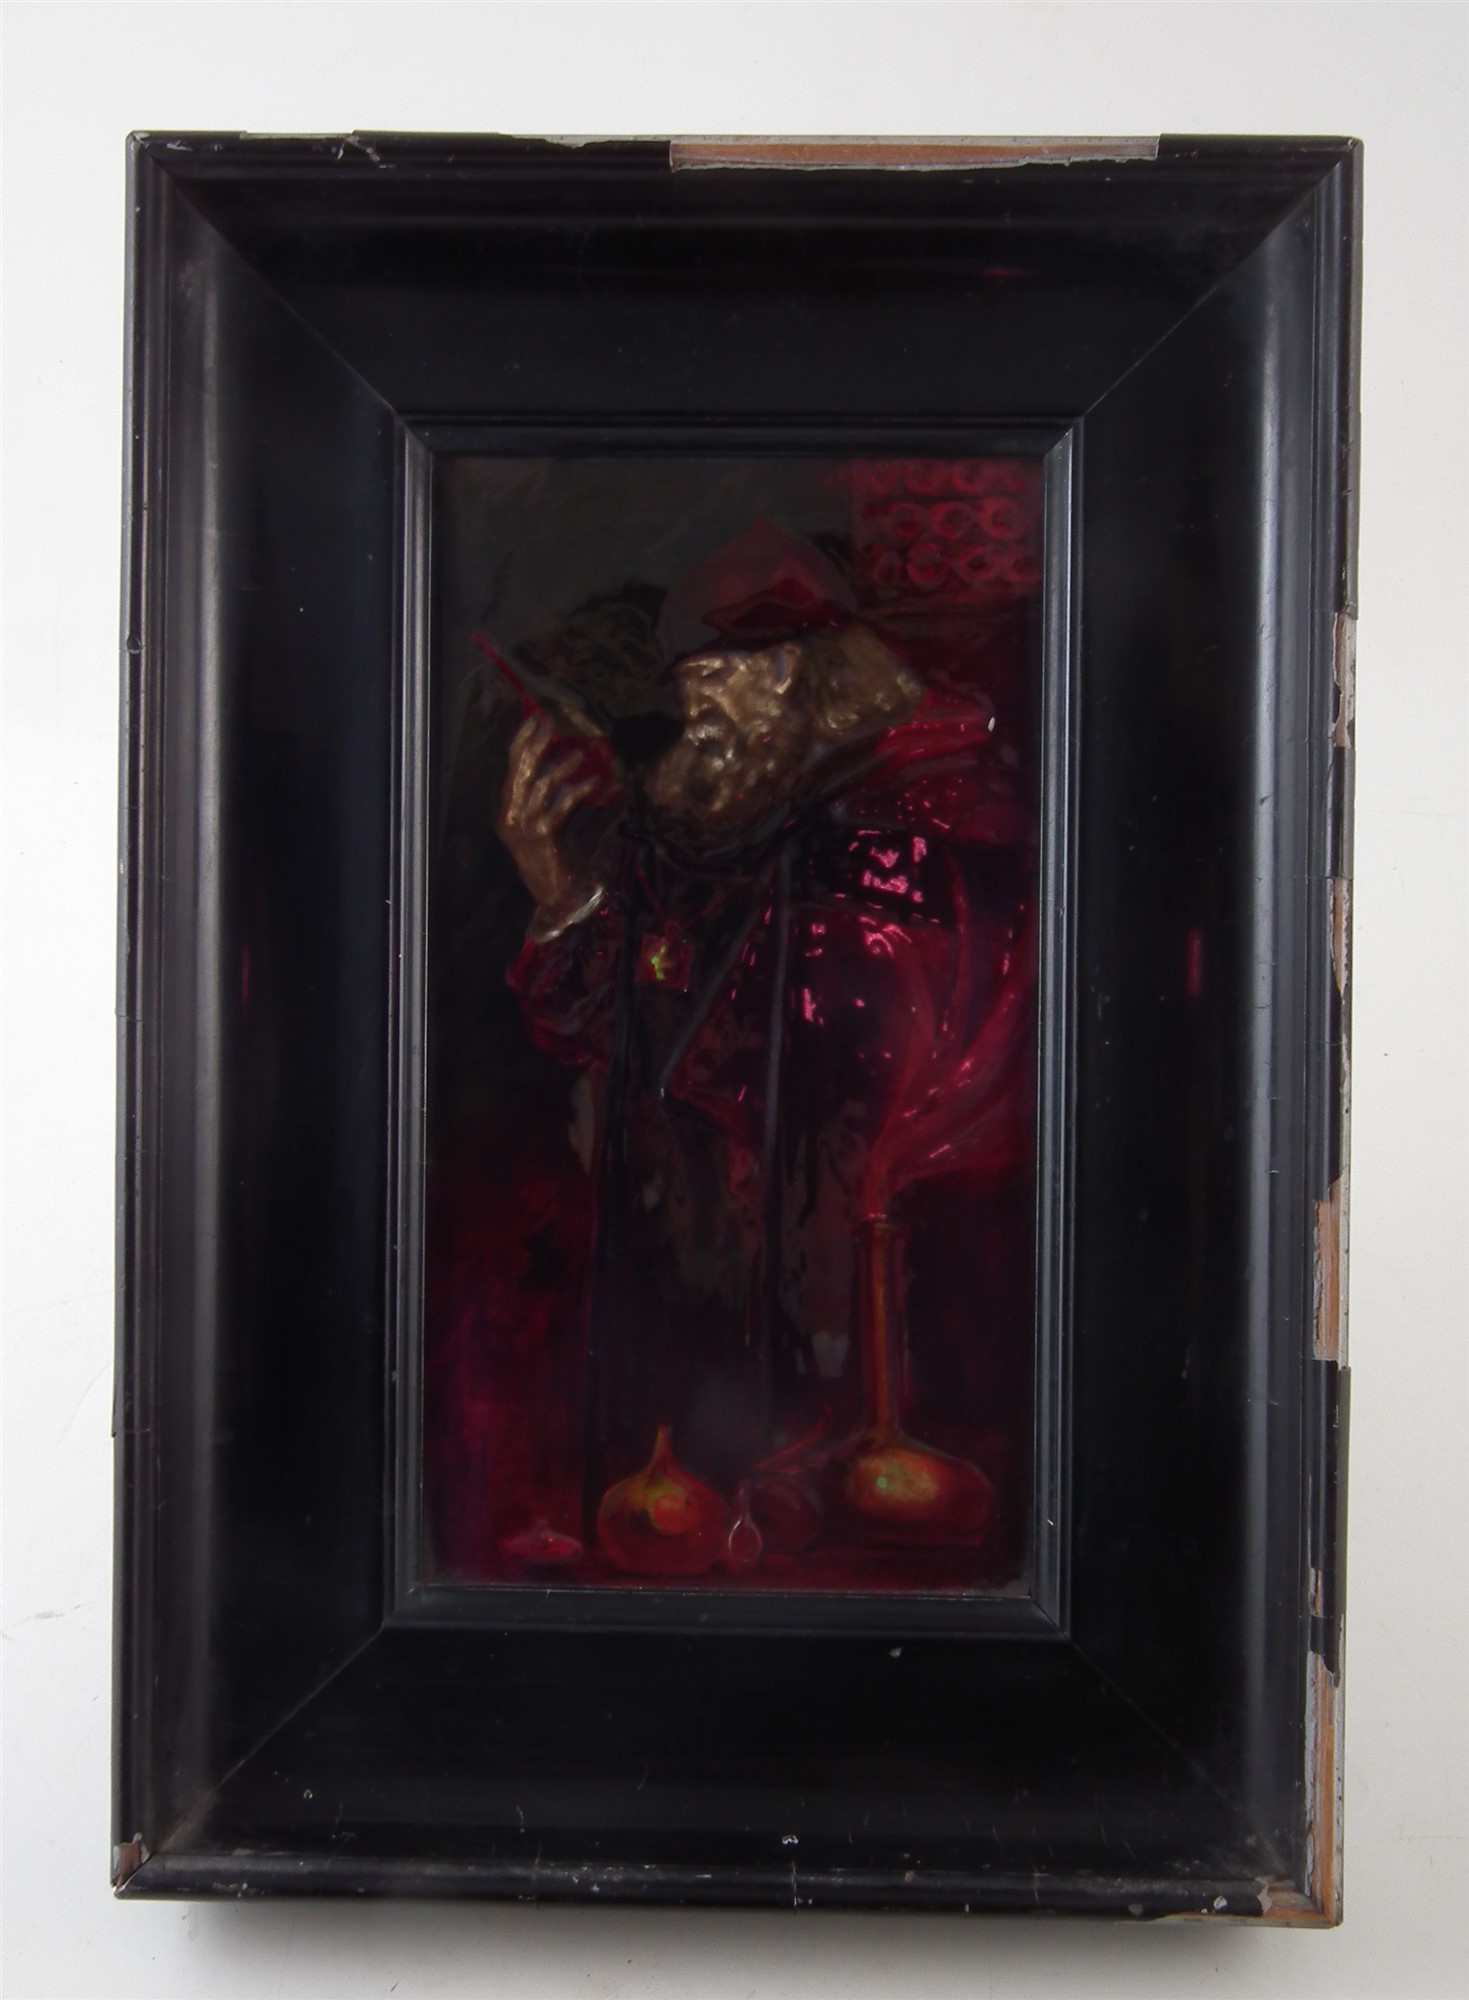 'The Alchemist' flambé plaque by Royal Doulton Art Director Charles Noke, depicting a robed figure - Image 6 of 11